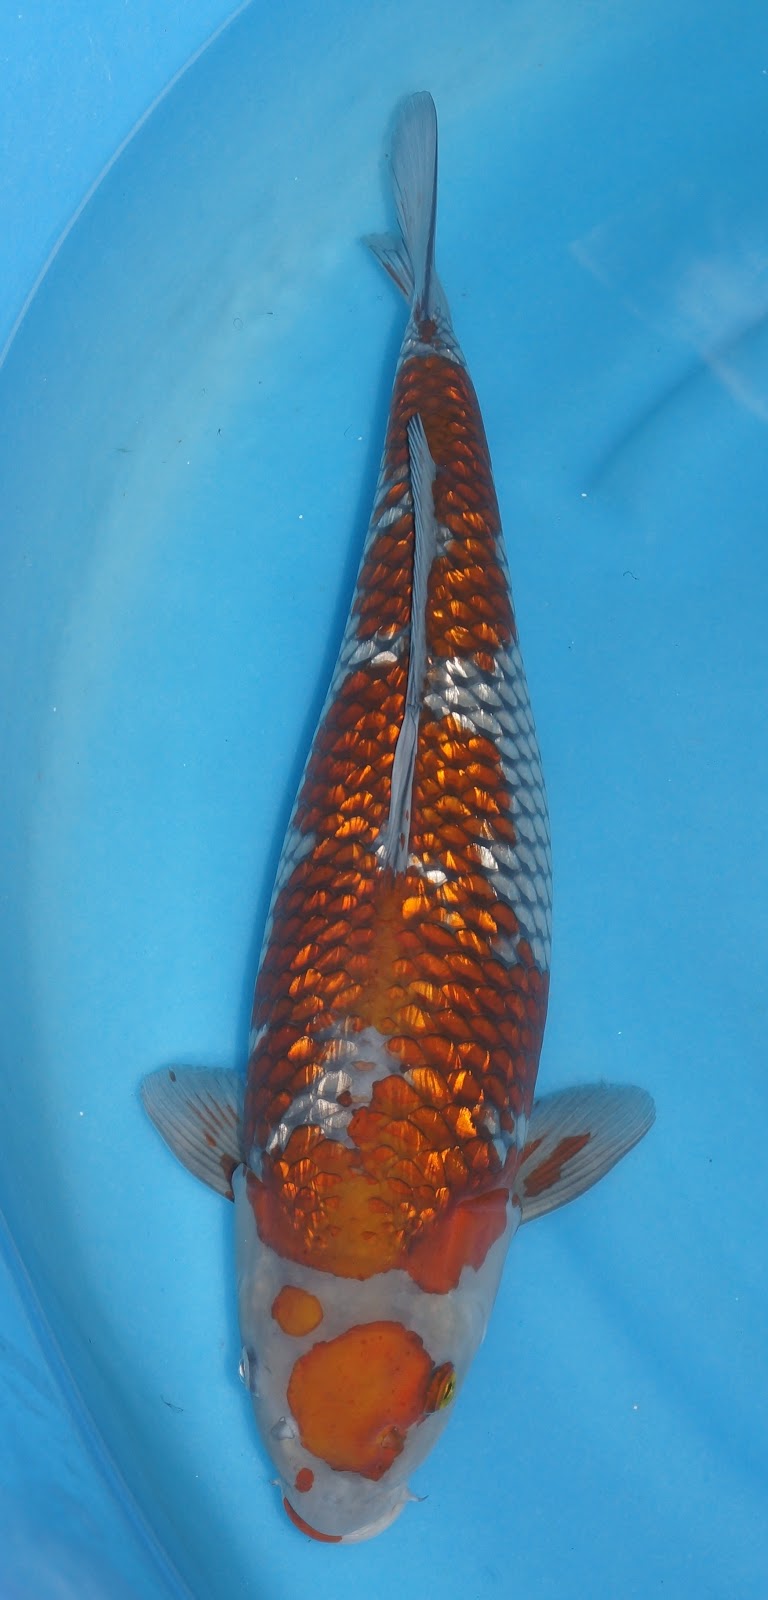 KOI FOR SALE: 1st ASIA YOUNG KOI SHOW 2012 - Results Of Our Farm